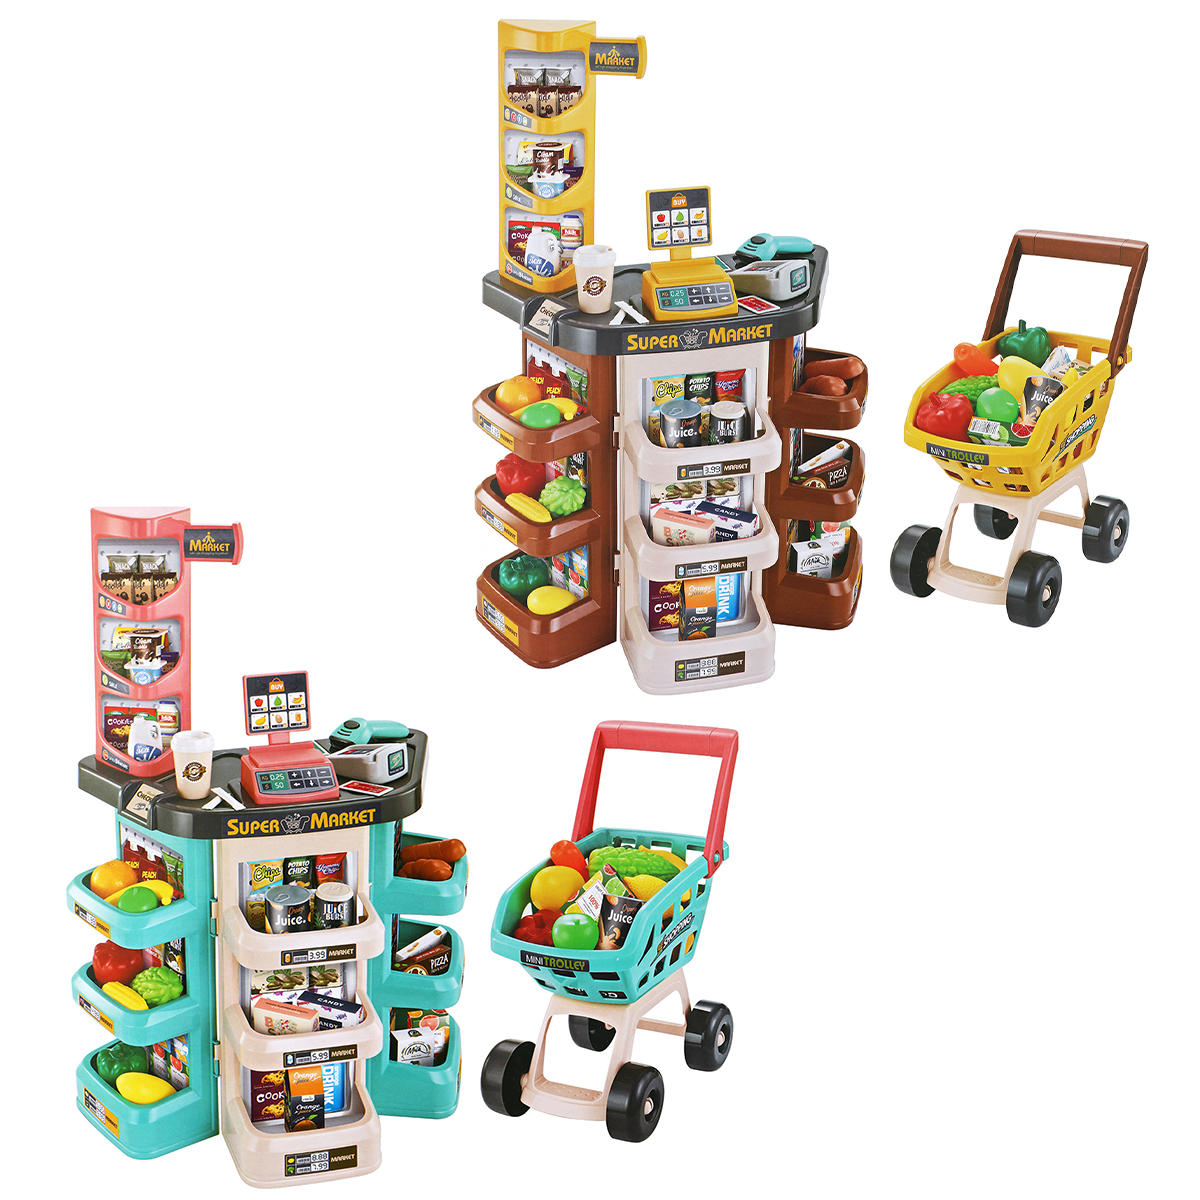 Image of Children Play House Kitchen Simulation Toys Scanner Credit Card Machine Trolley Shopping Trolley Cash Register Set